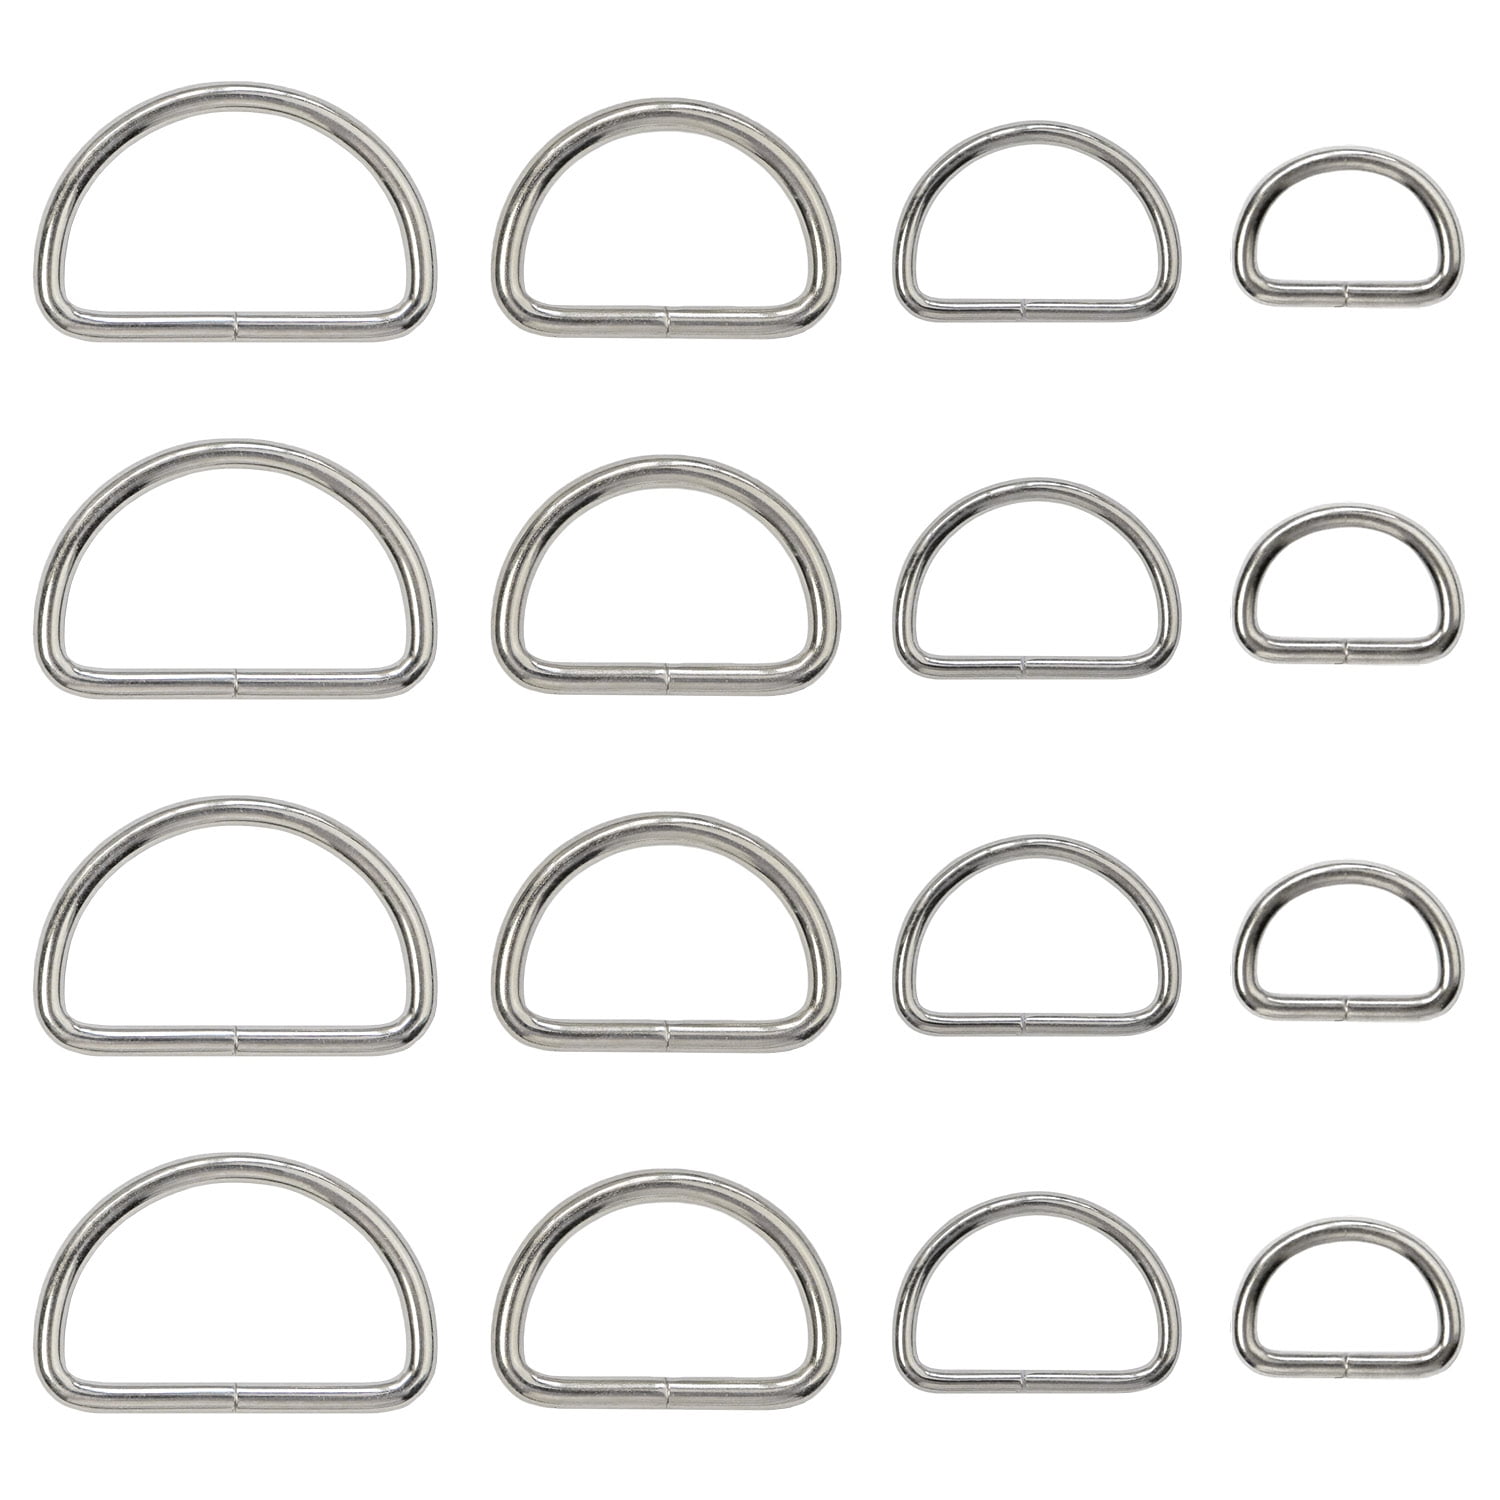 Metal D Ring Non Welded D-Rings Nickel Plated Silver Assorted 0.5 inch, 0.75 inch, 1 inch, 1.25 inch (100 Pack)